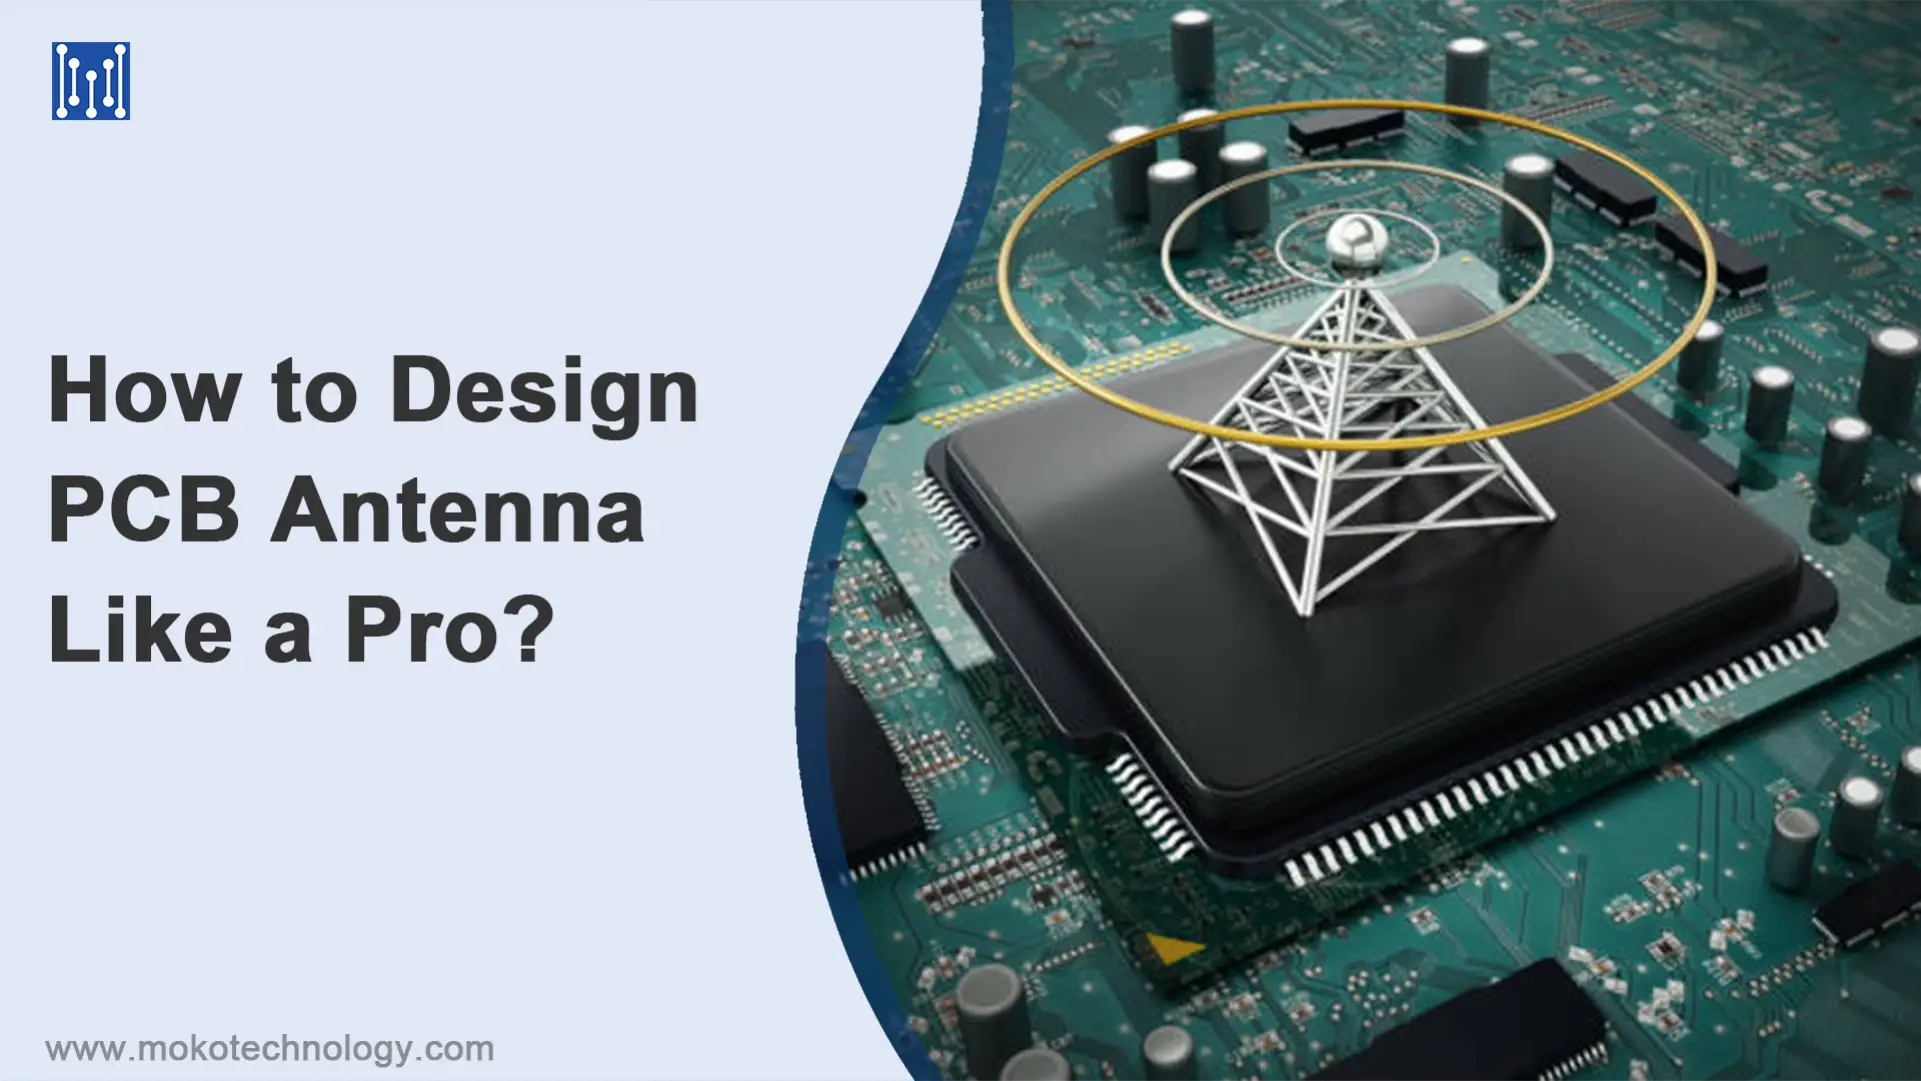 How to Design PCB Antenna Like a Pro